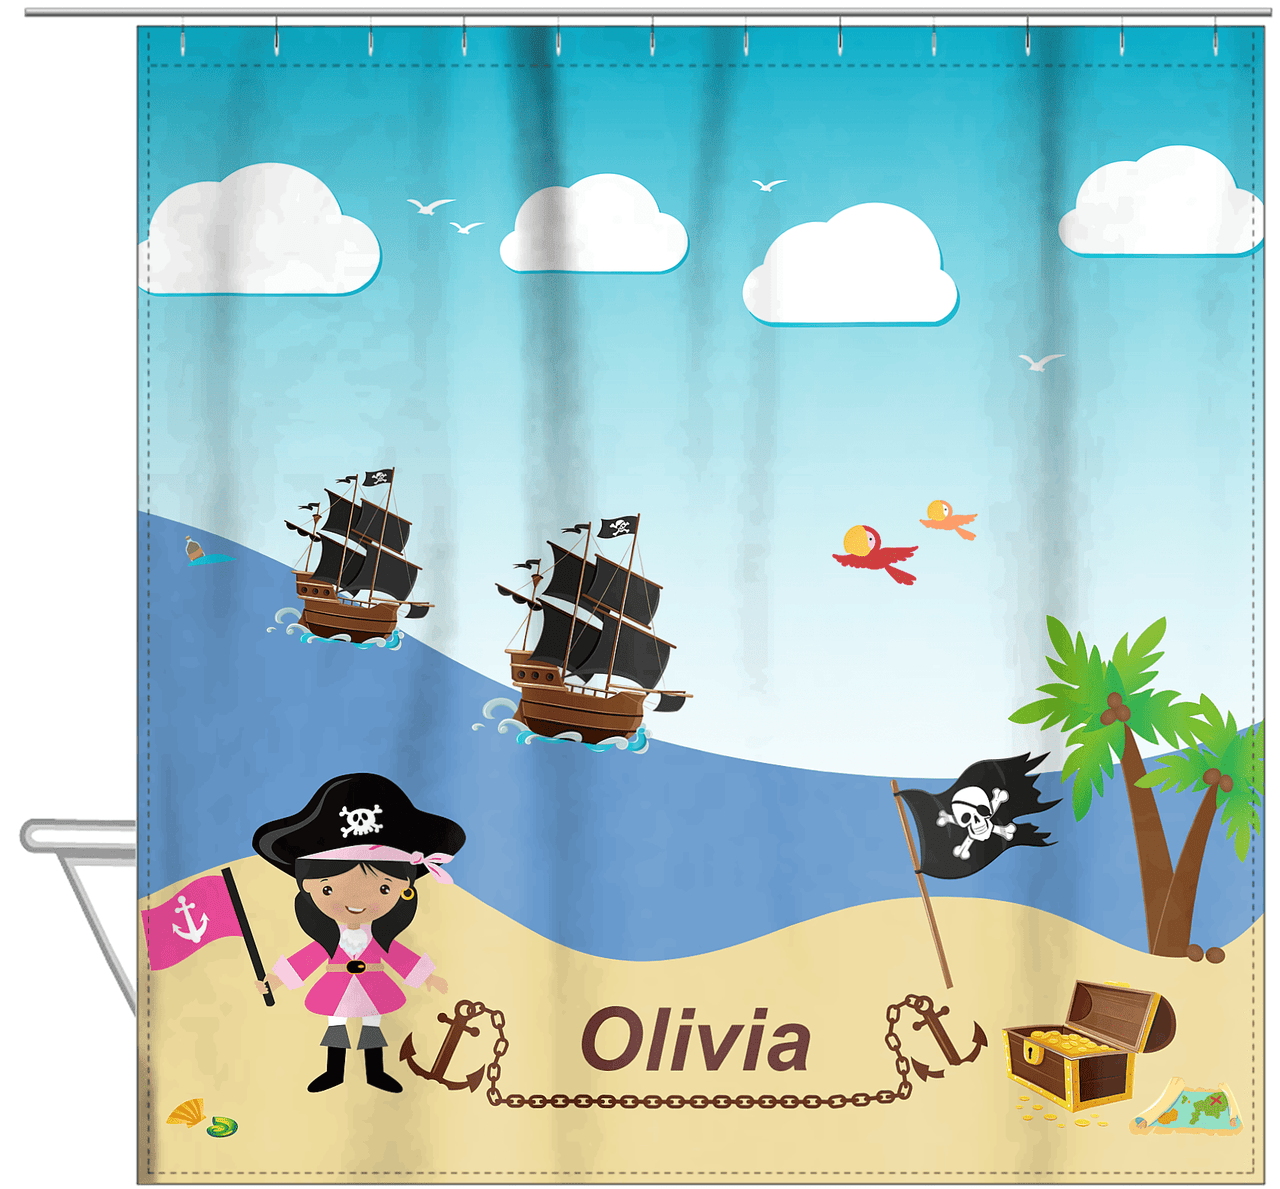 Personalized Pirate Shower Curtain V - Blue Background - Black Hair Girl with Flag - Hanging View